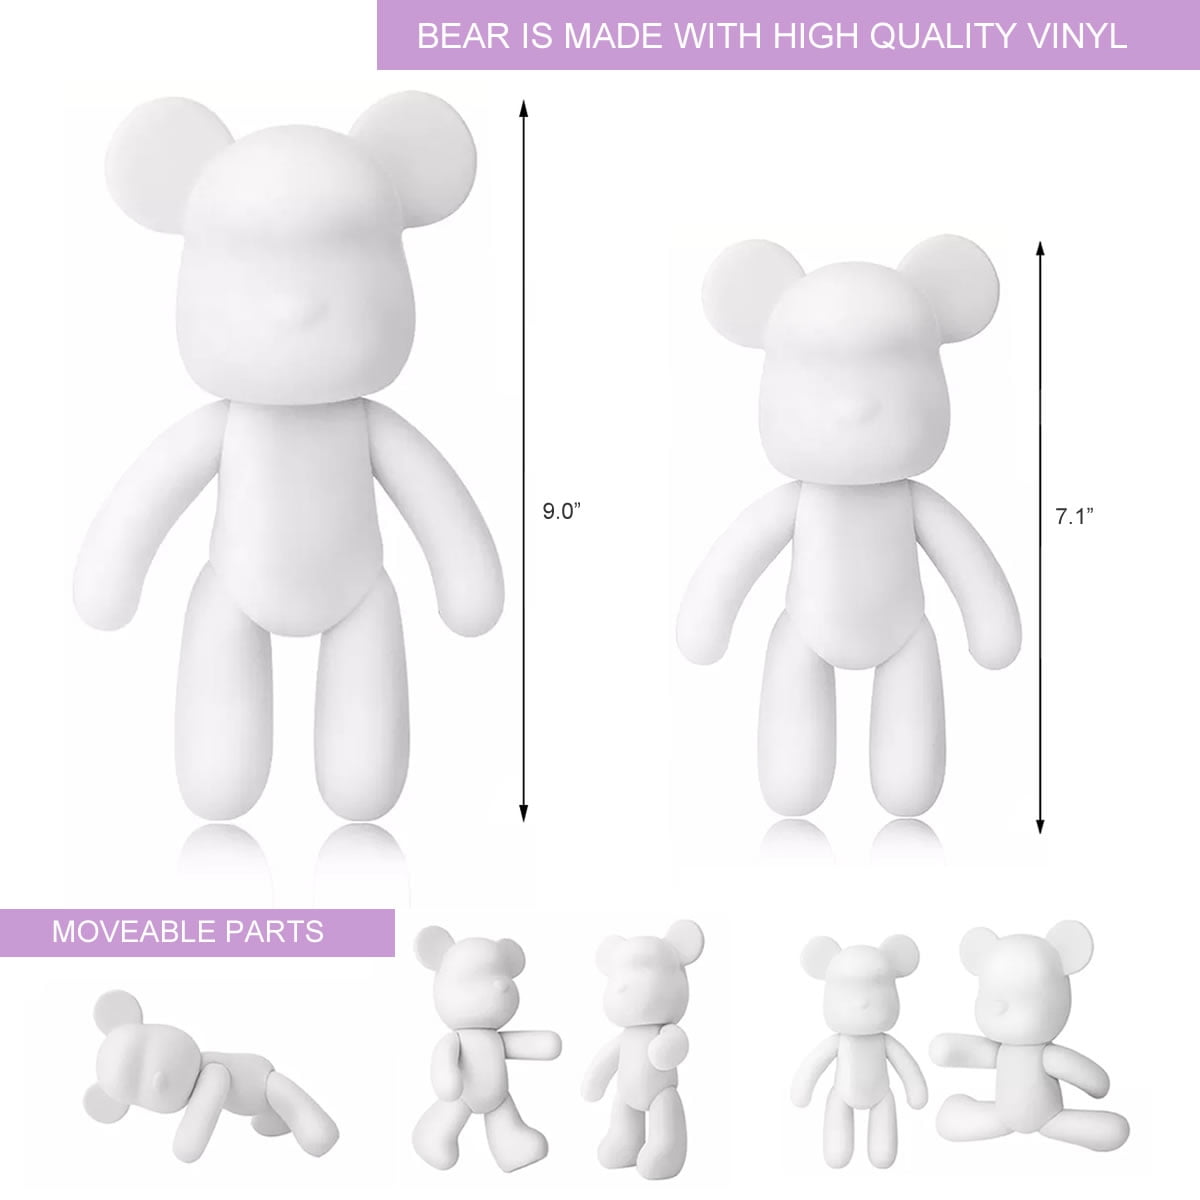 9 inch Easy DIY Create Customize Art and Craft Kits Non-Toxic Pour Over Acrylic Fluid Paint Bear Kit for Boys and Girls